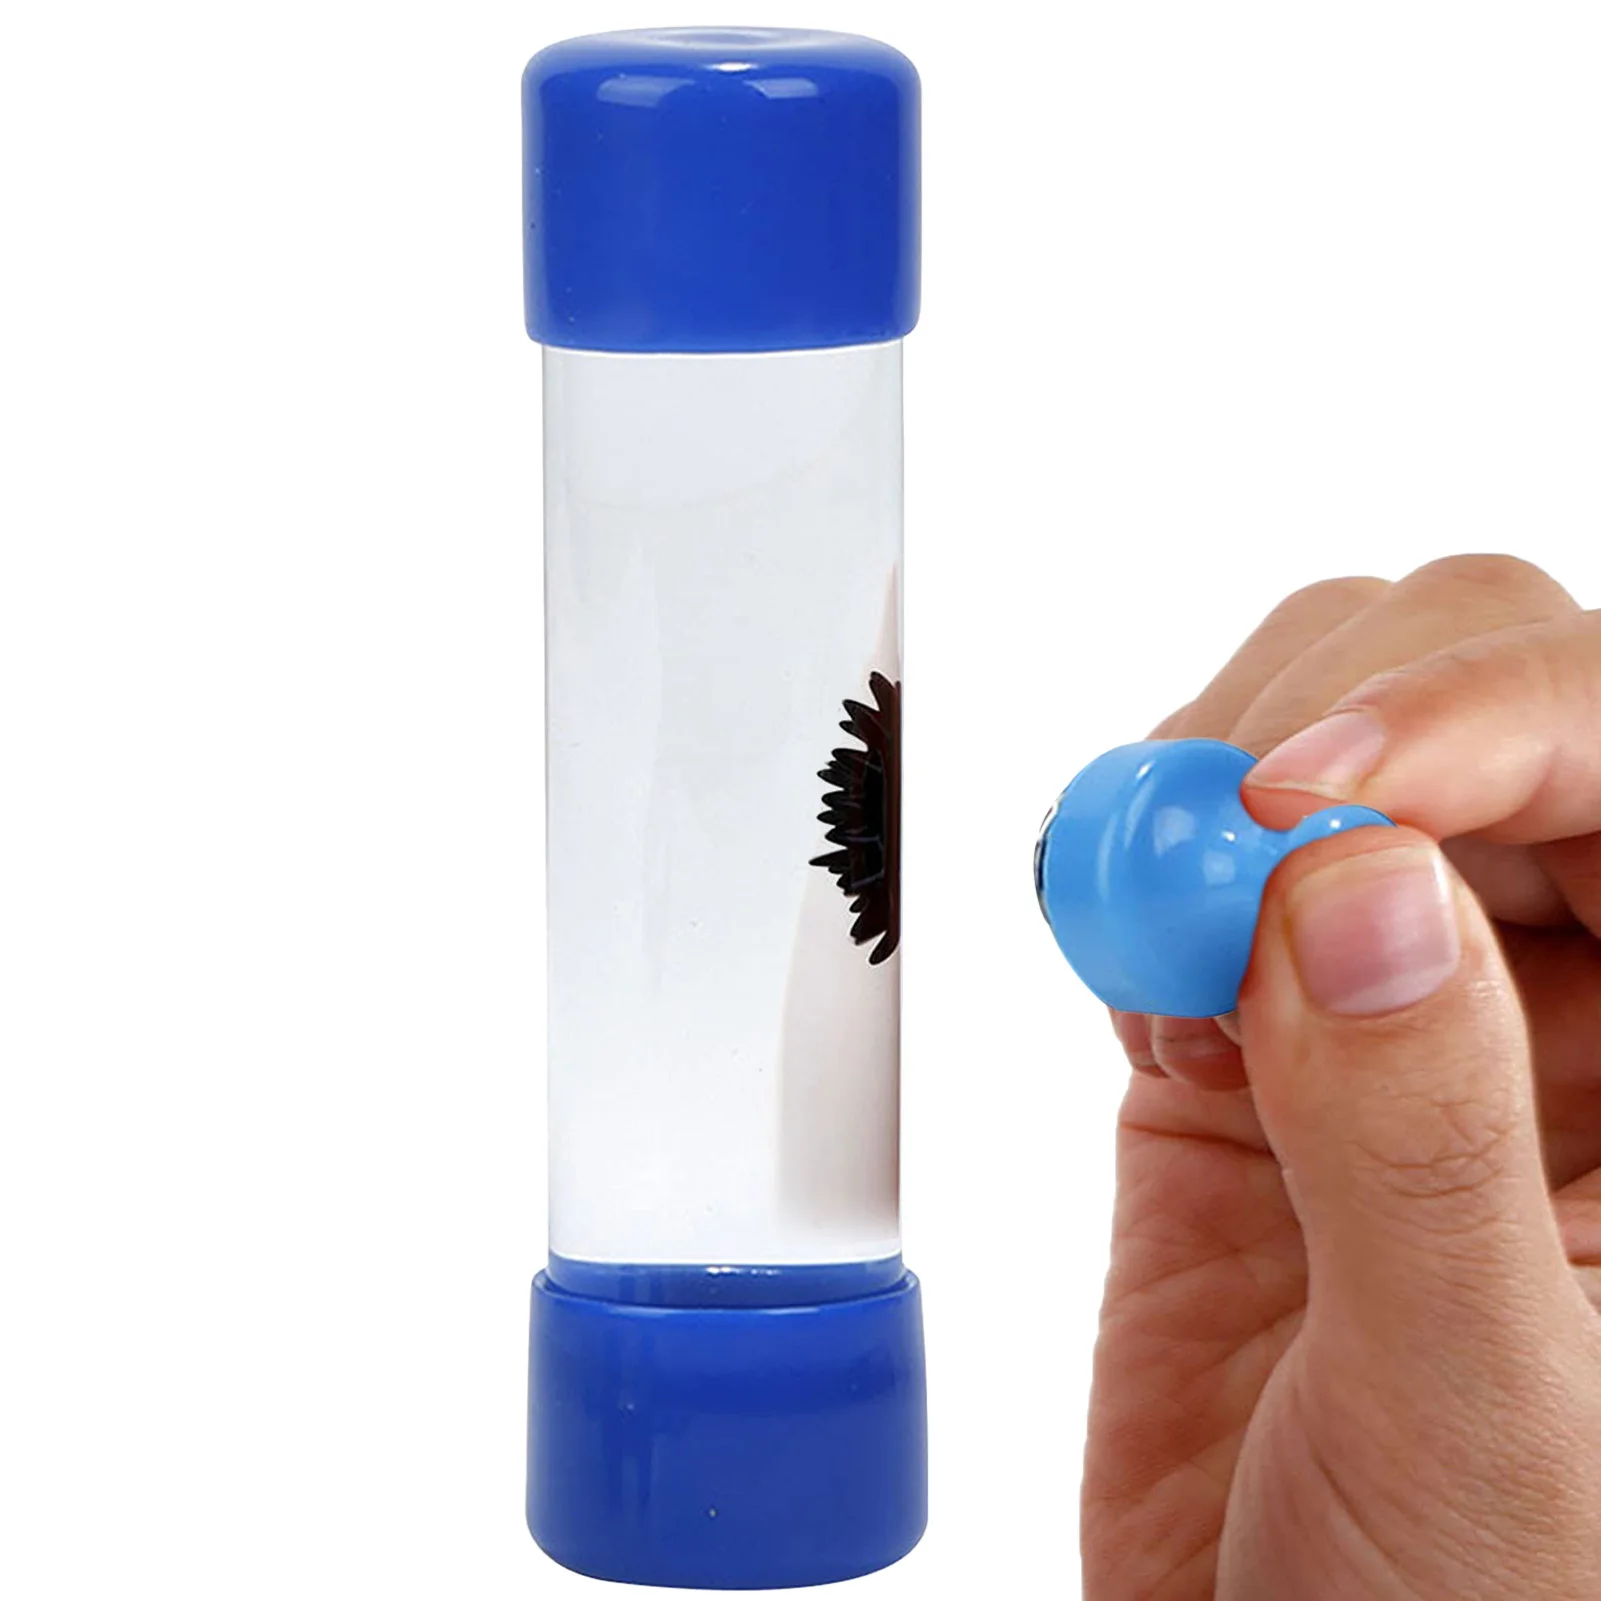 

Ferrofluid In A Bottle 1PCS Magnetic Fluid Liquid Display Funny Toy Stress Relief Toys Science Decompression Anti Stress Toys